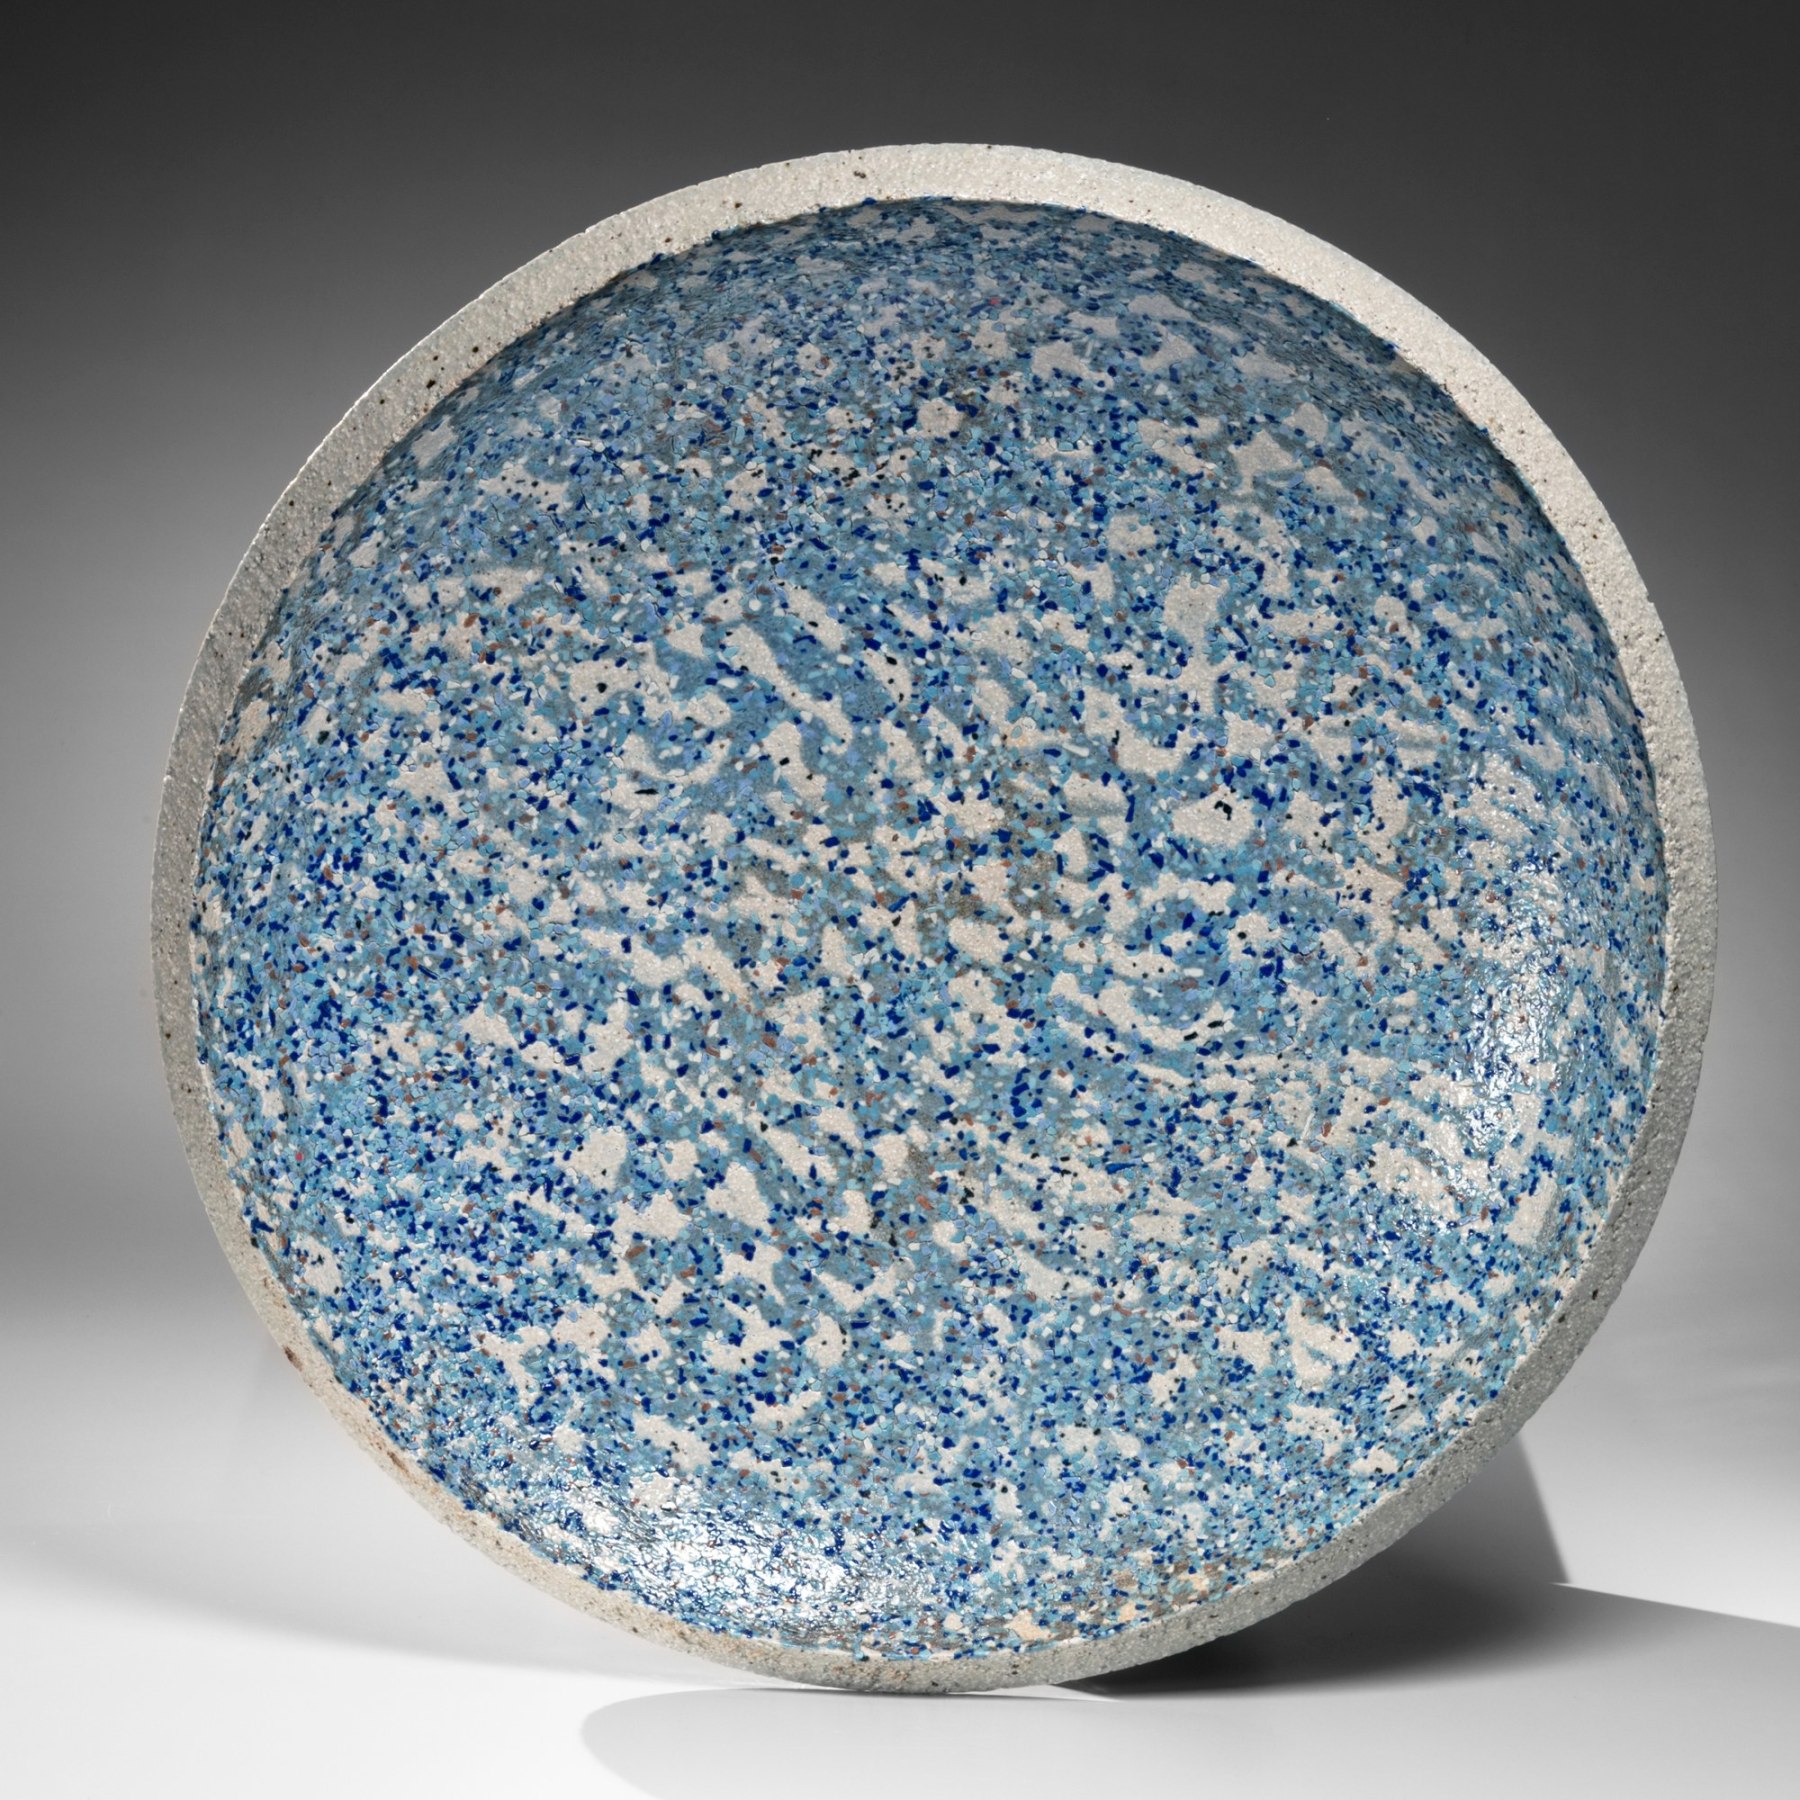 Matsui Kōsei (1927-2003), Platter with Streaming River and Floating Clouds patterns